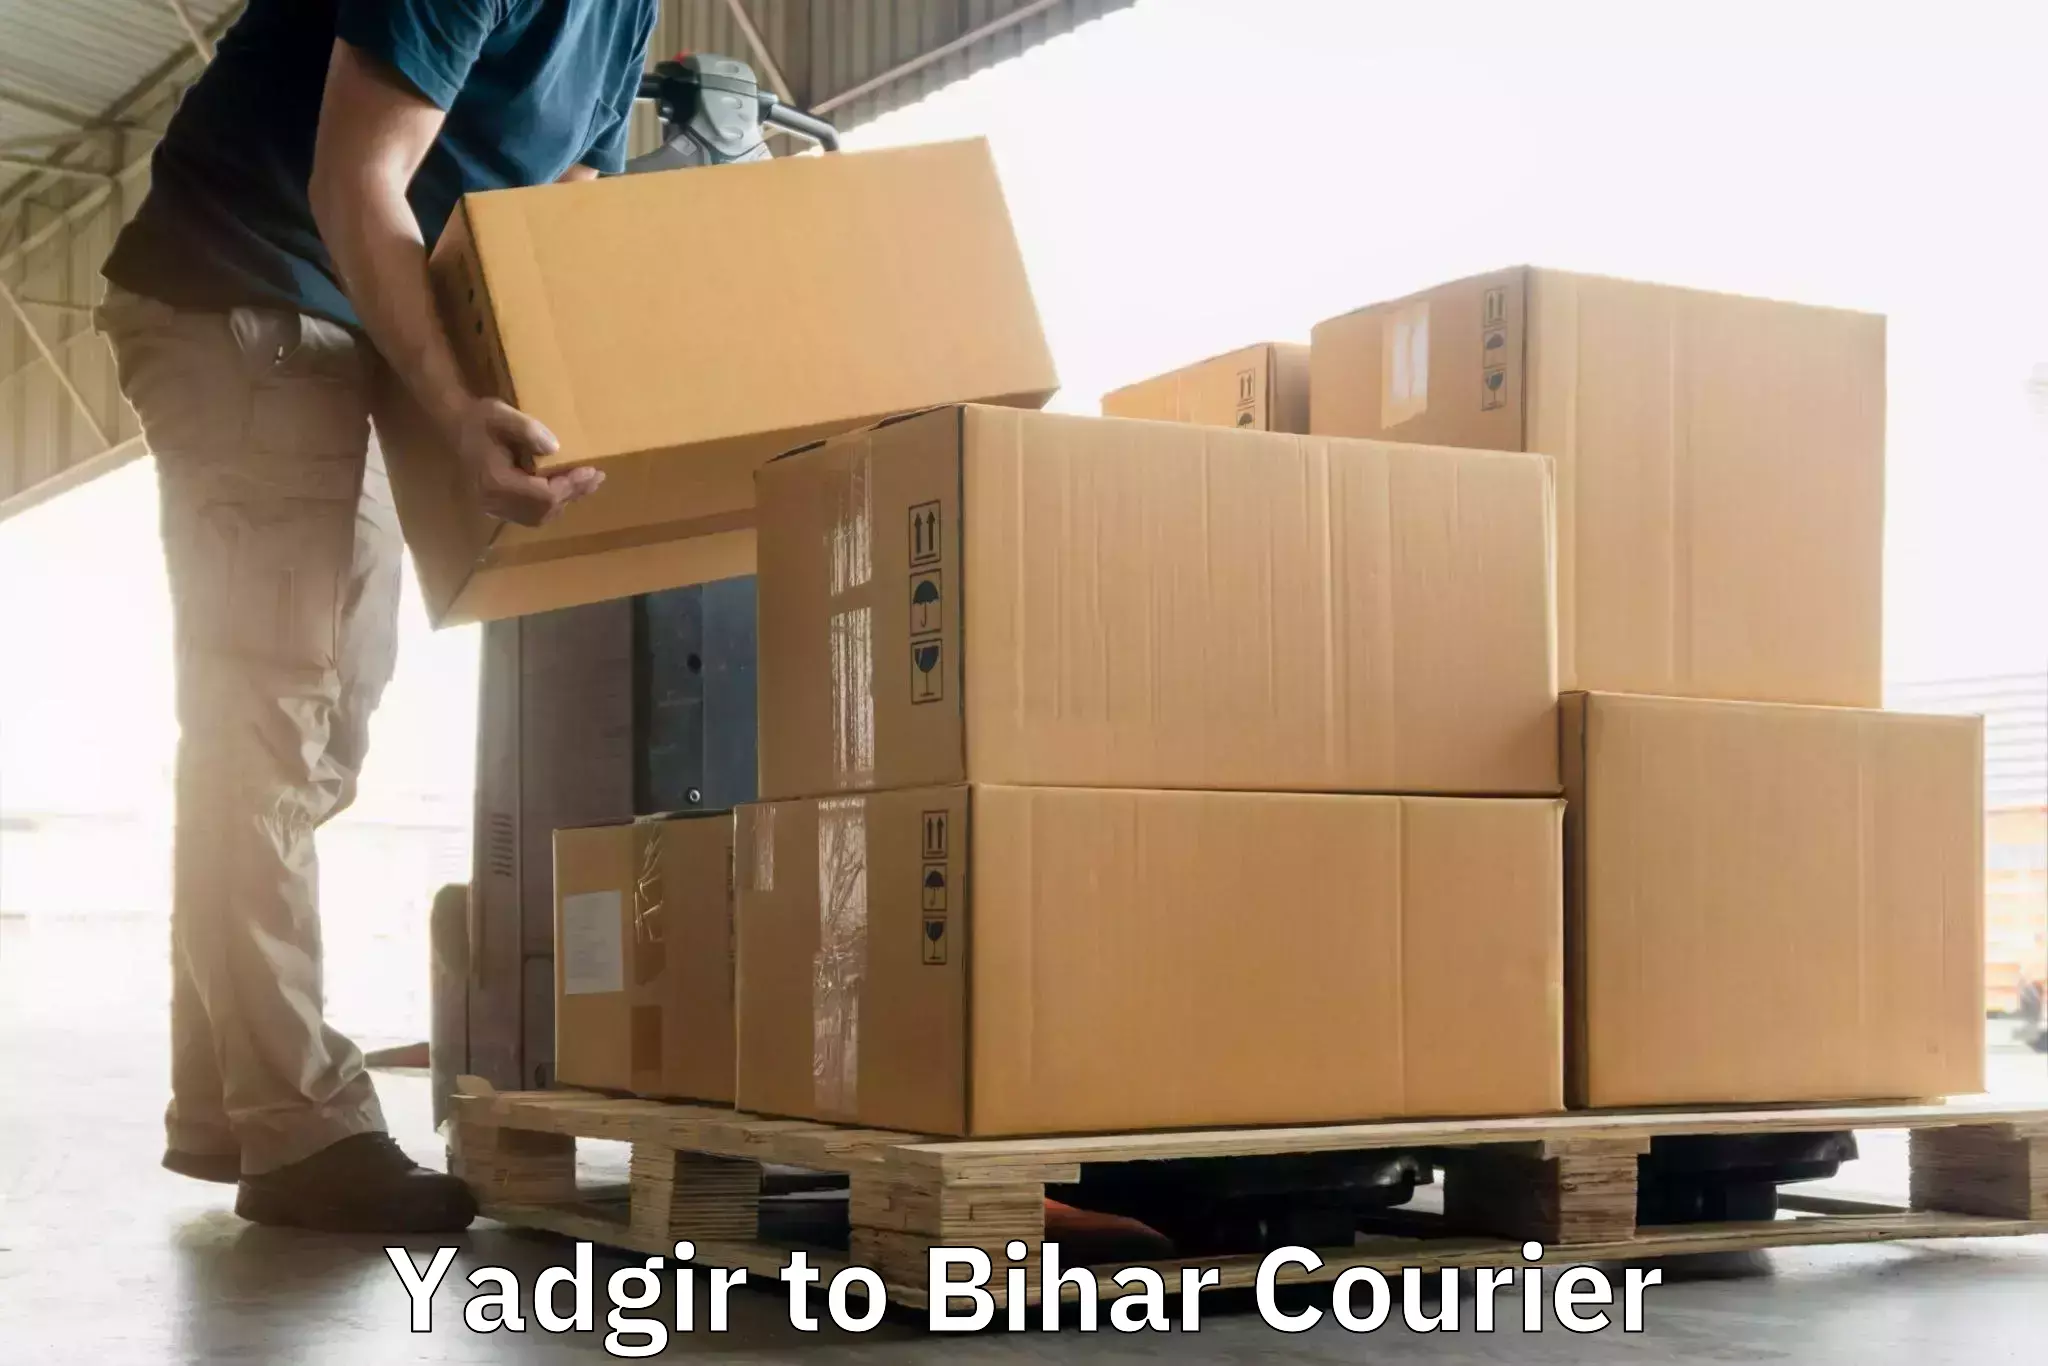 User-friendly delivery service Yadgir to Vaishali